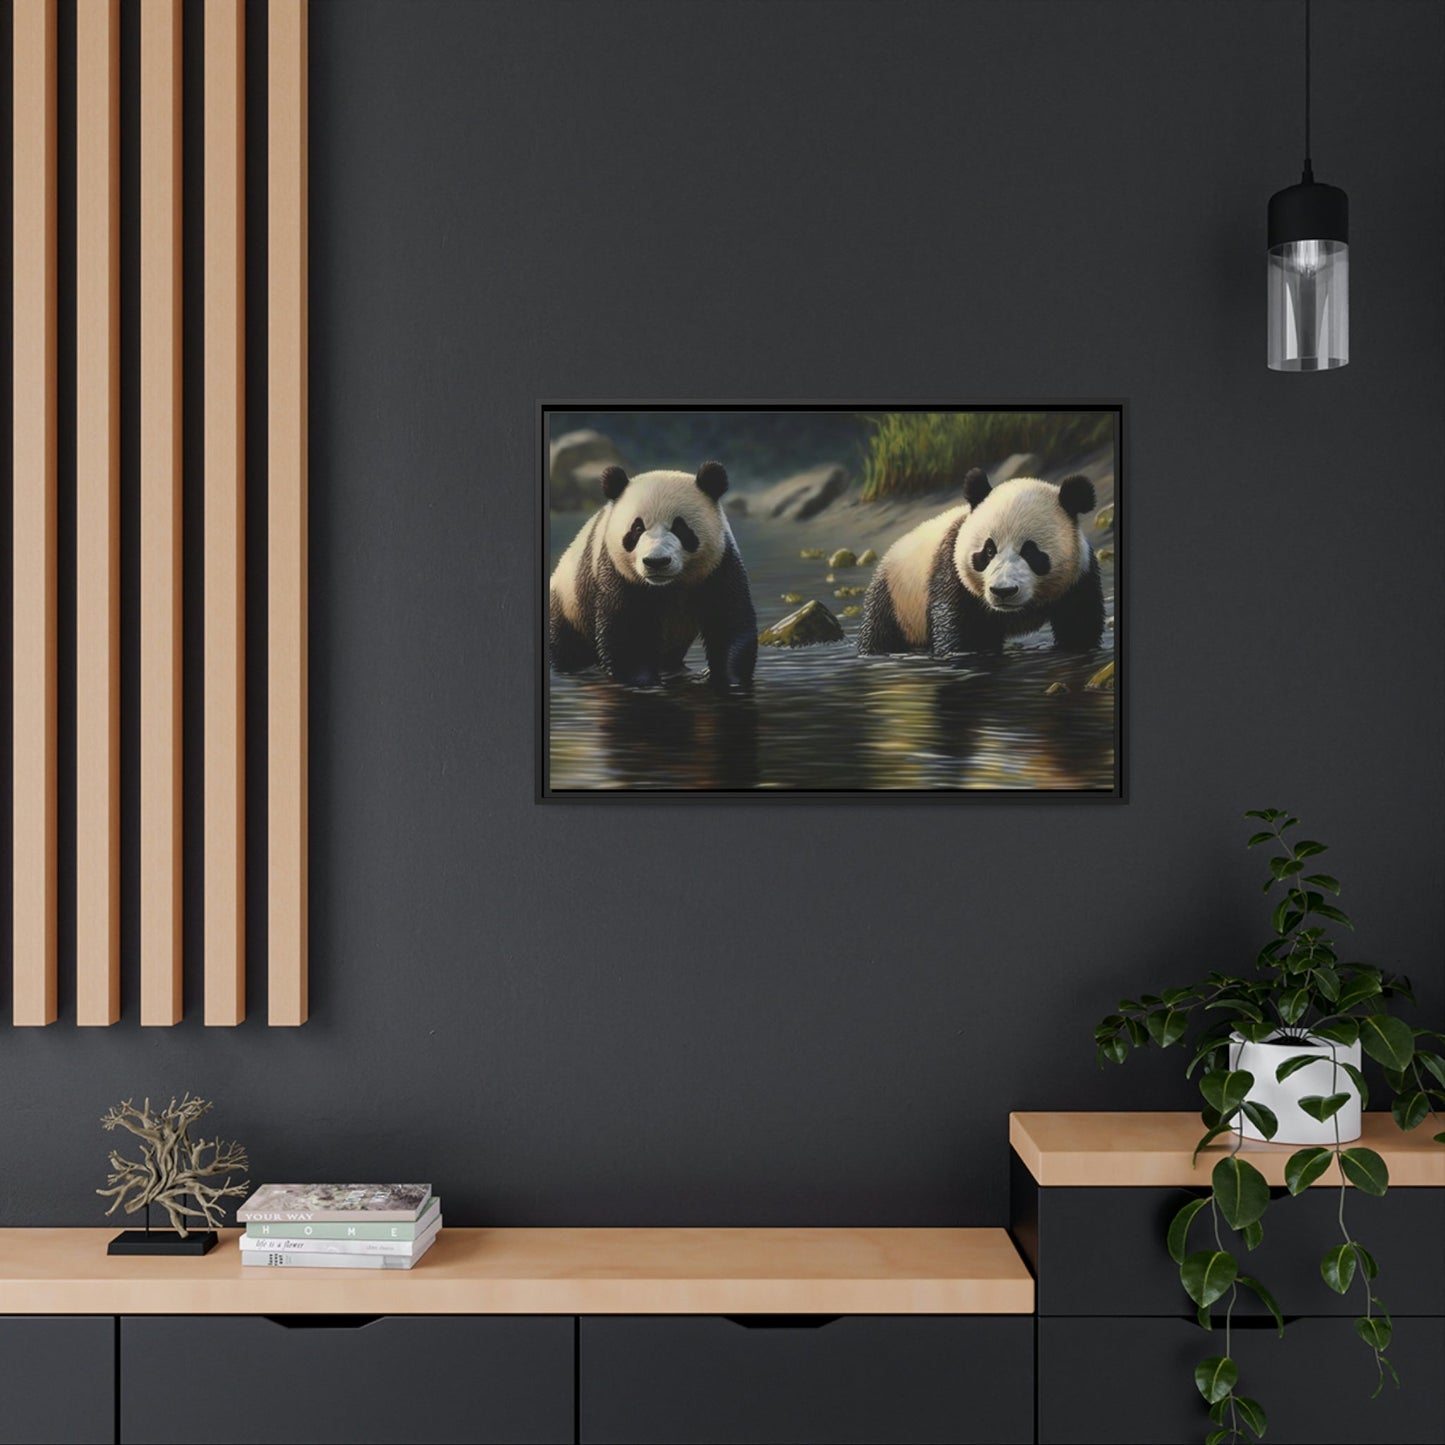 Bamboo Eaters and Playful Creatures: A Portrait of Pandas on Canvas